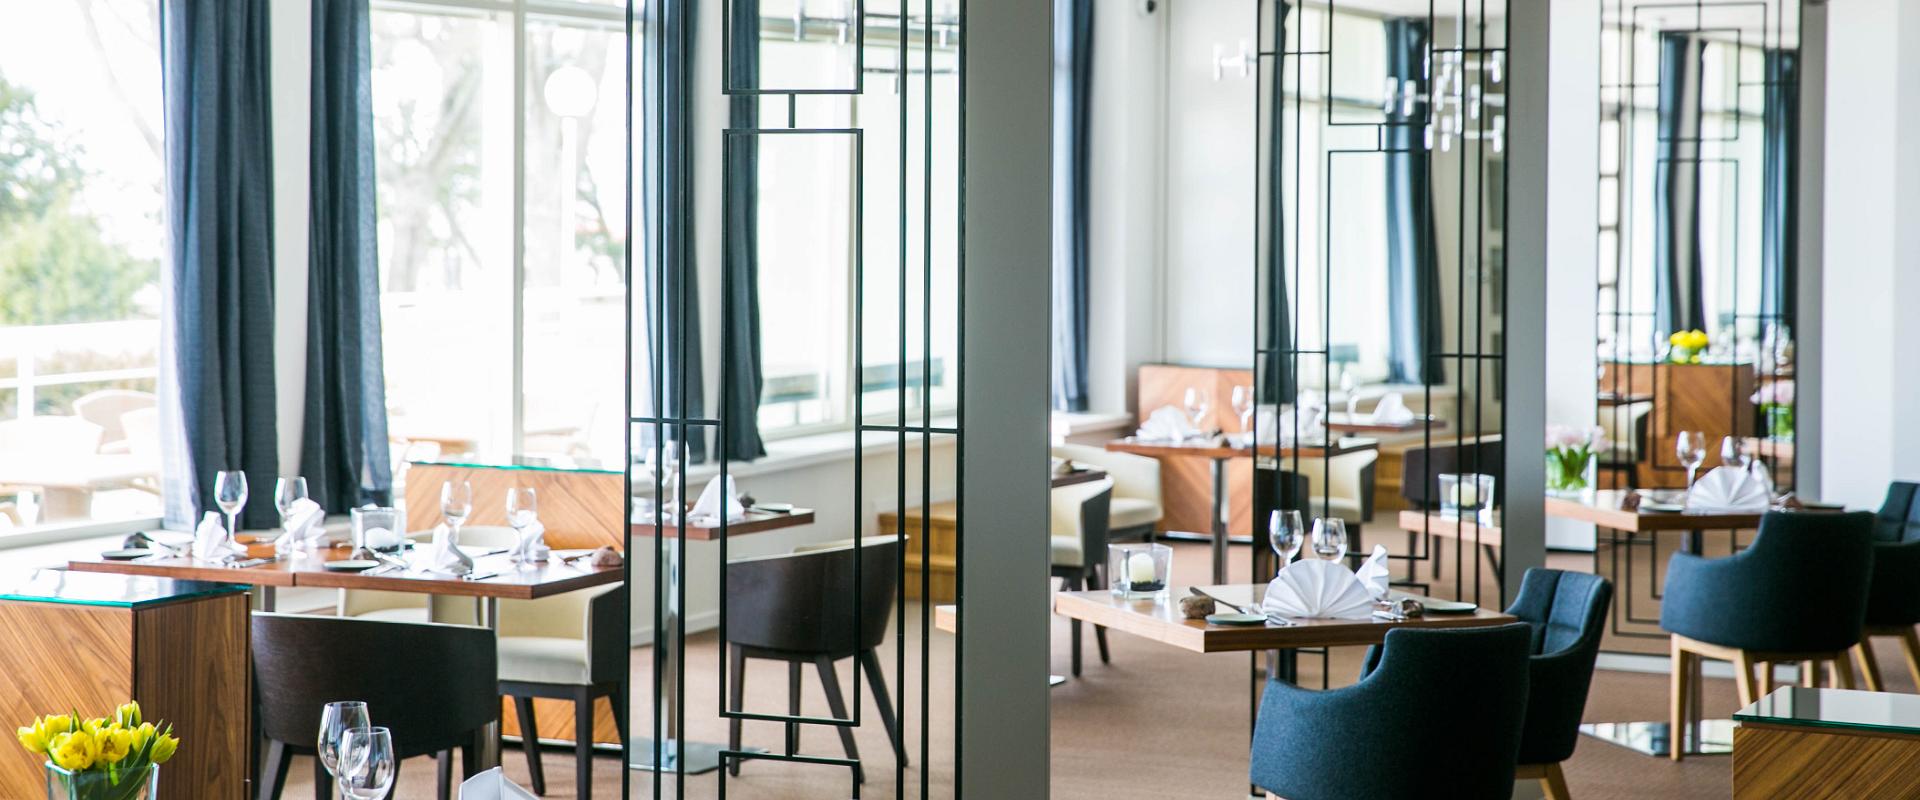 Rannahotell Restaurant, which offers world-class Scandinavian cuisine, has glamour of the 1930s. This elegant restaurant has high ceilings and offers 